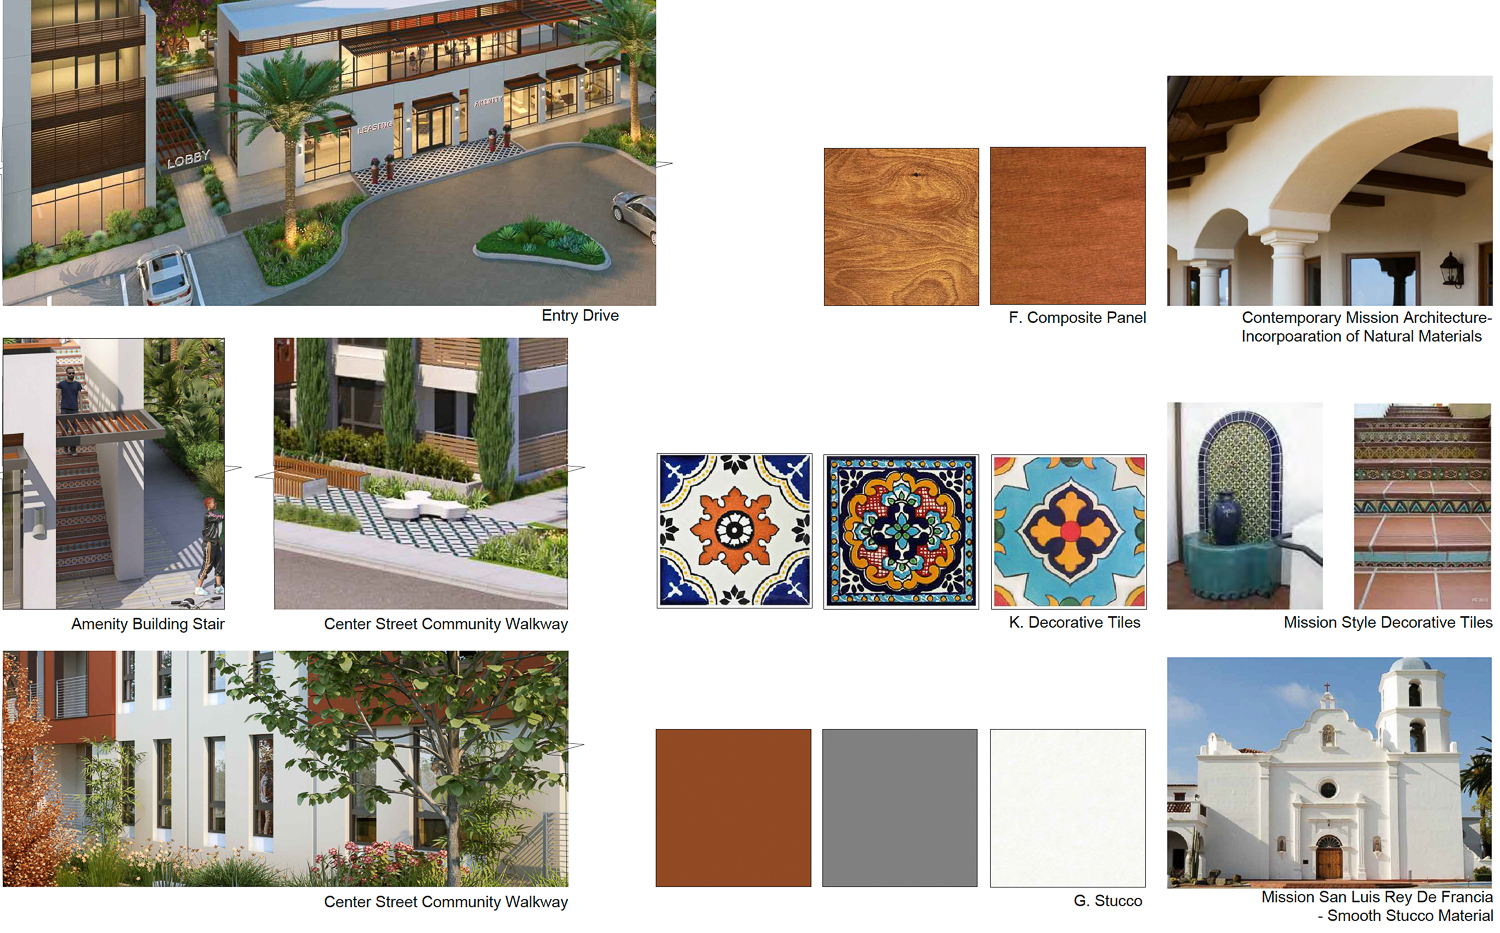 1100 El Camino Real mission architecture design influence, collage by KTGY Group